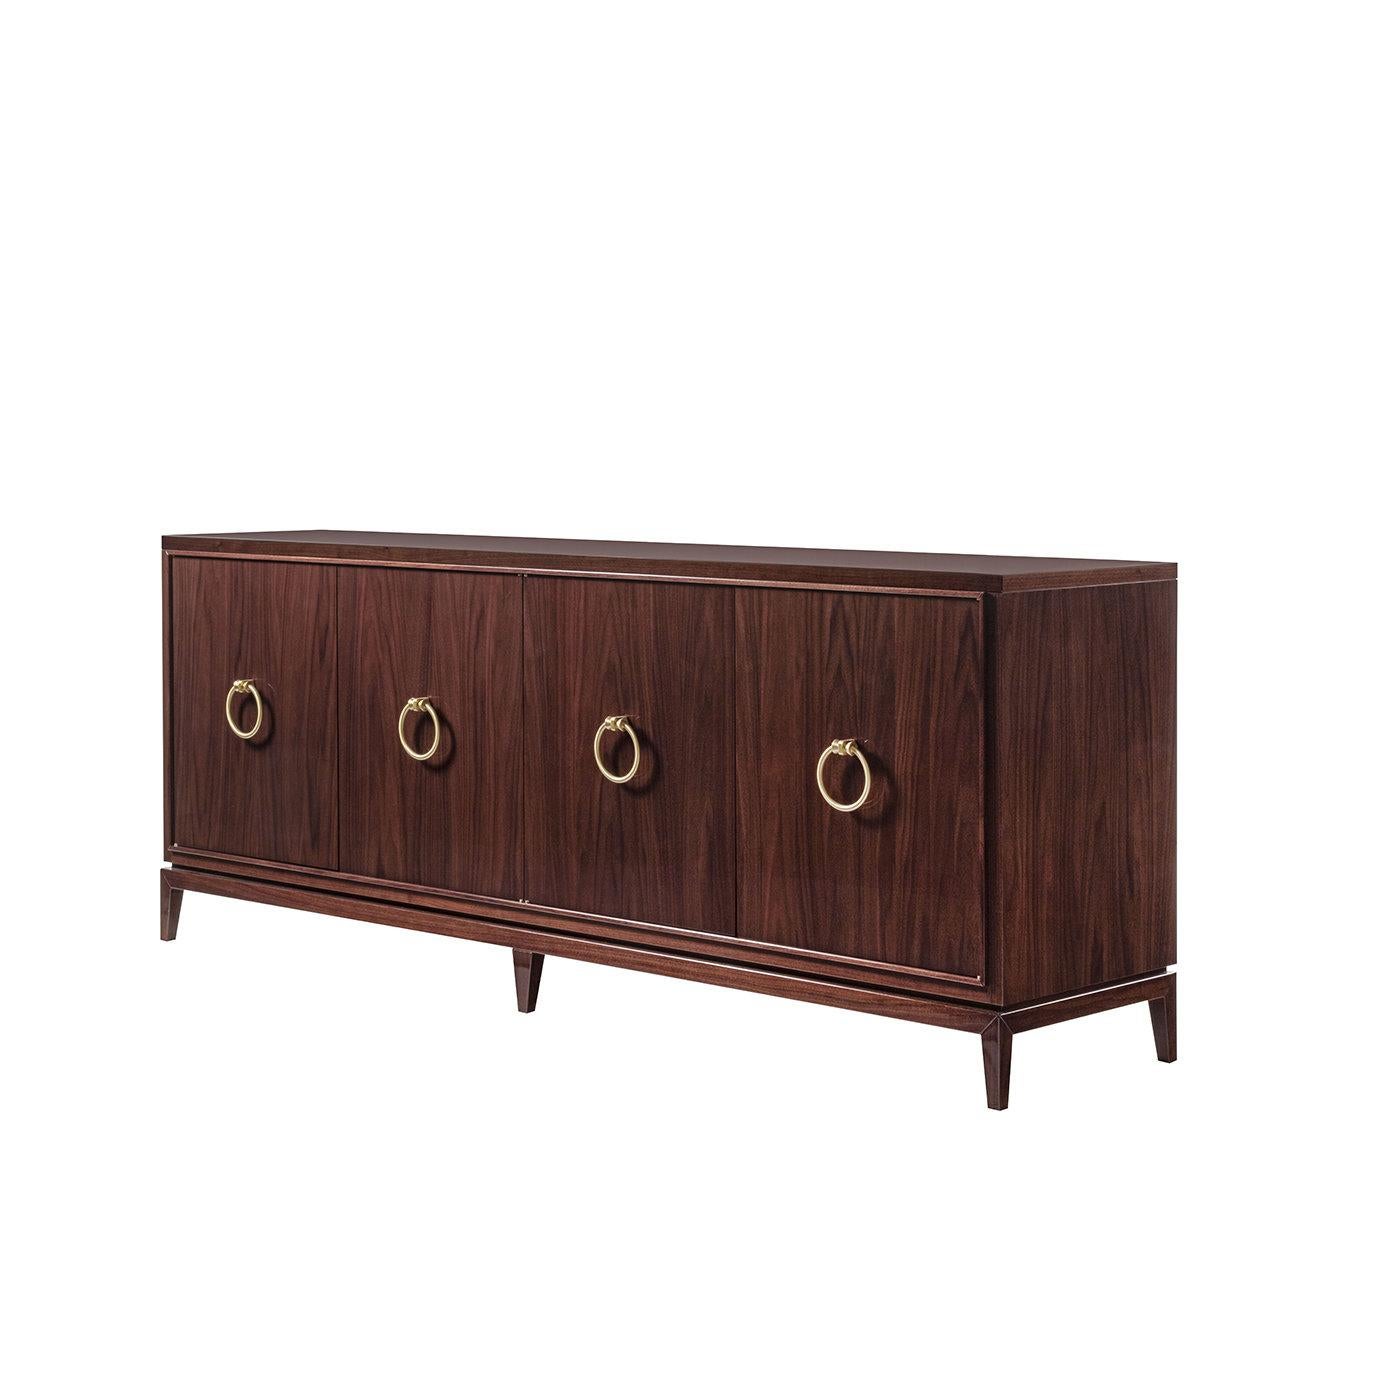 This streamlined sideboard raised on tiny feet provides effective storage with its four doors opening to reveal inner glass shelves. The wooden frame, with base and profile in solid walnut, is finished in glossy tobacco walnut, intense shade only